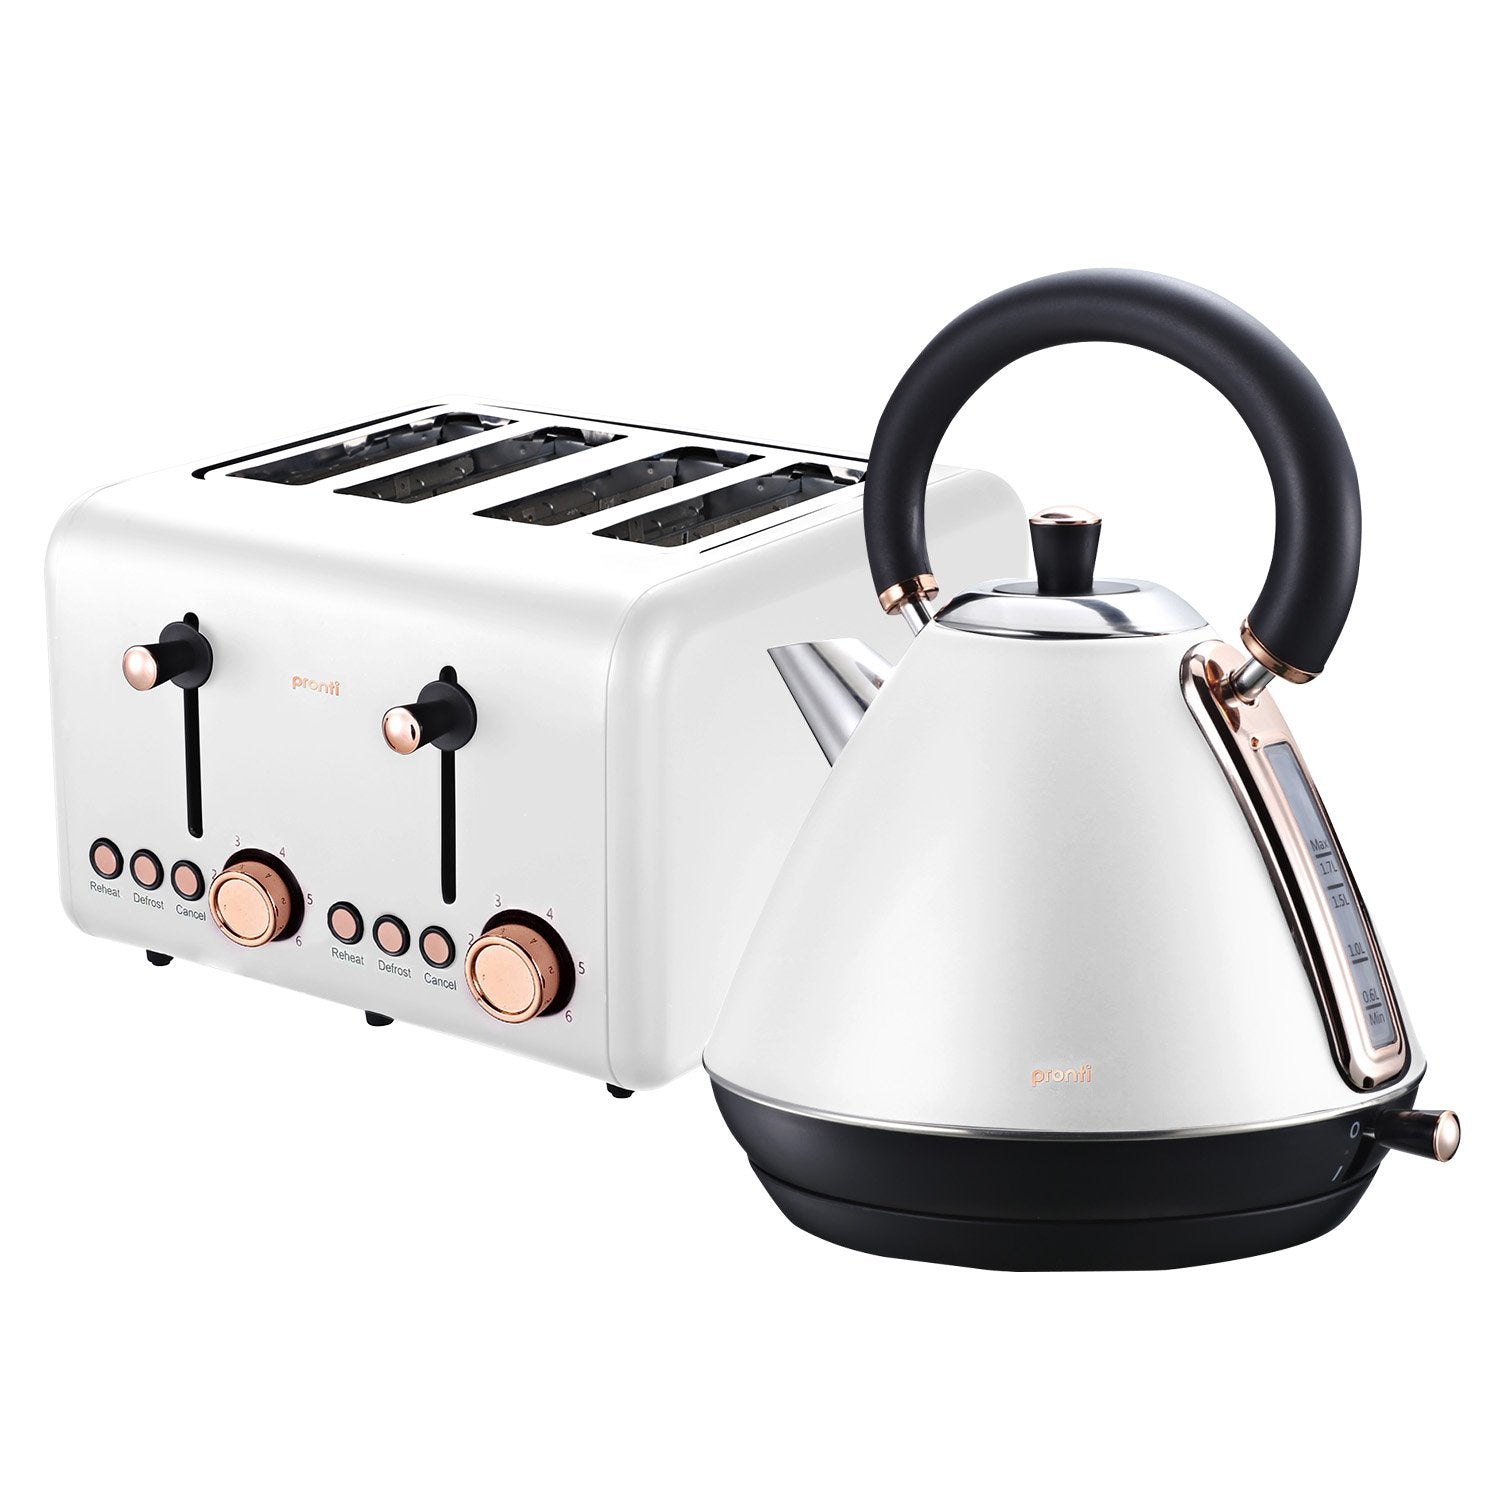 Pronti Rose Trim Collection Toaster & Kettle Bundle - White - SILBERSHELL